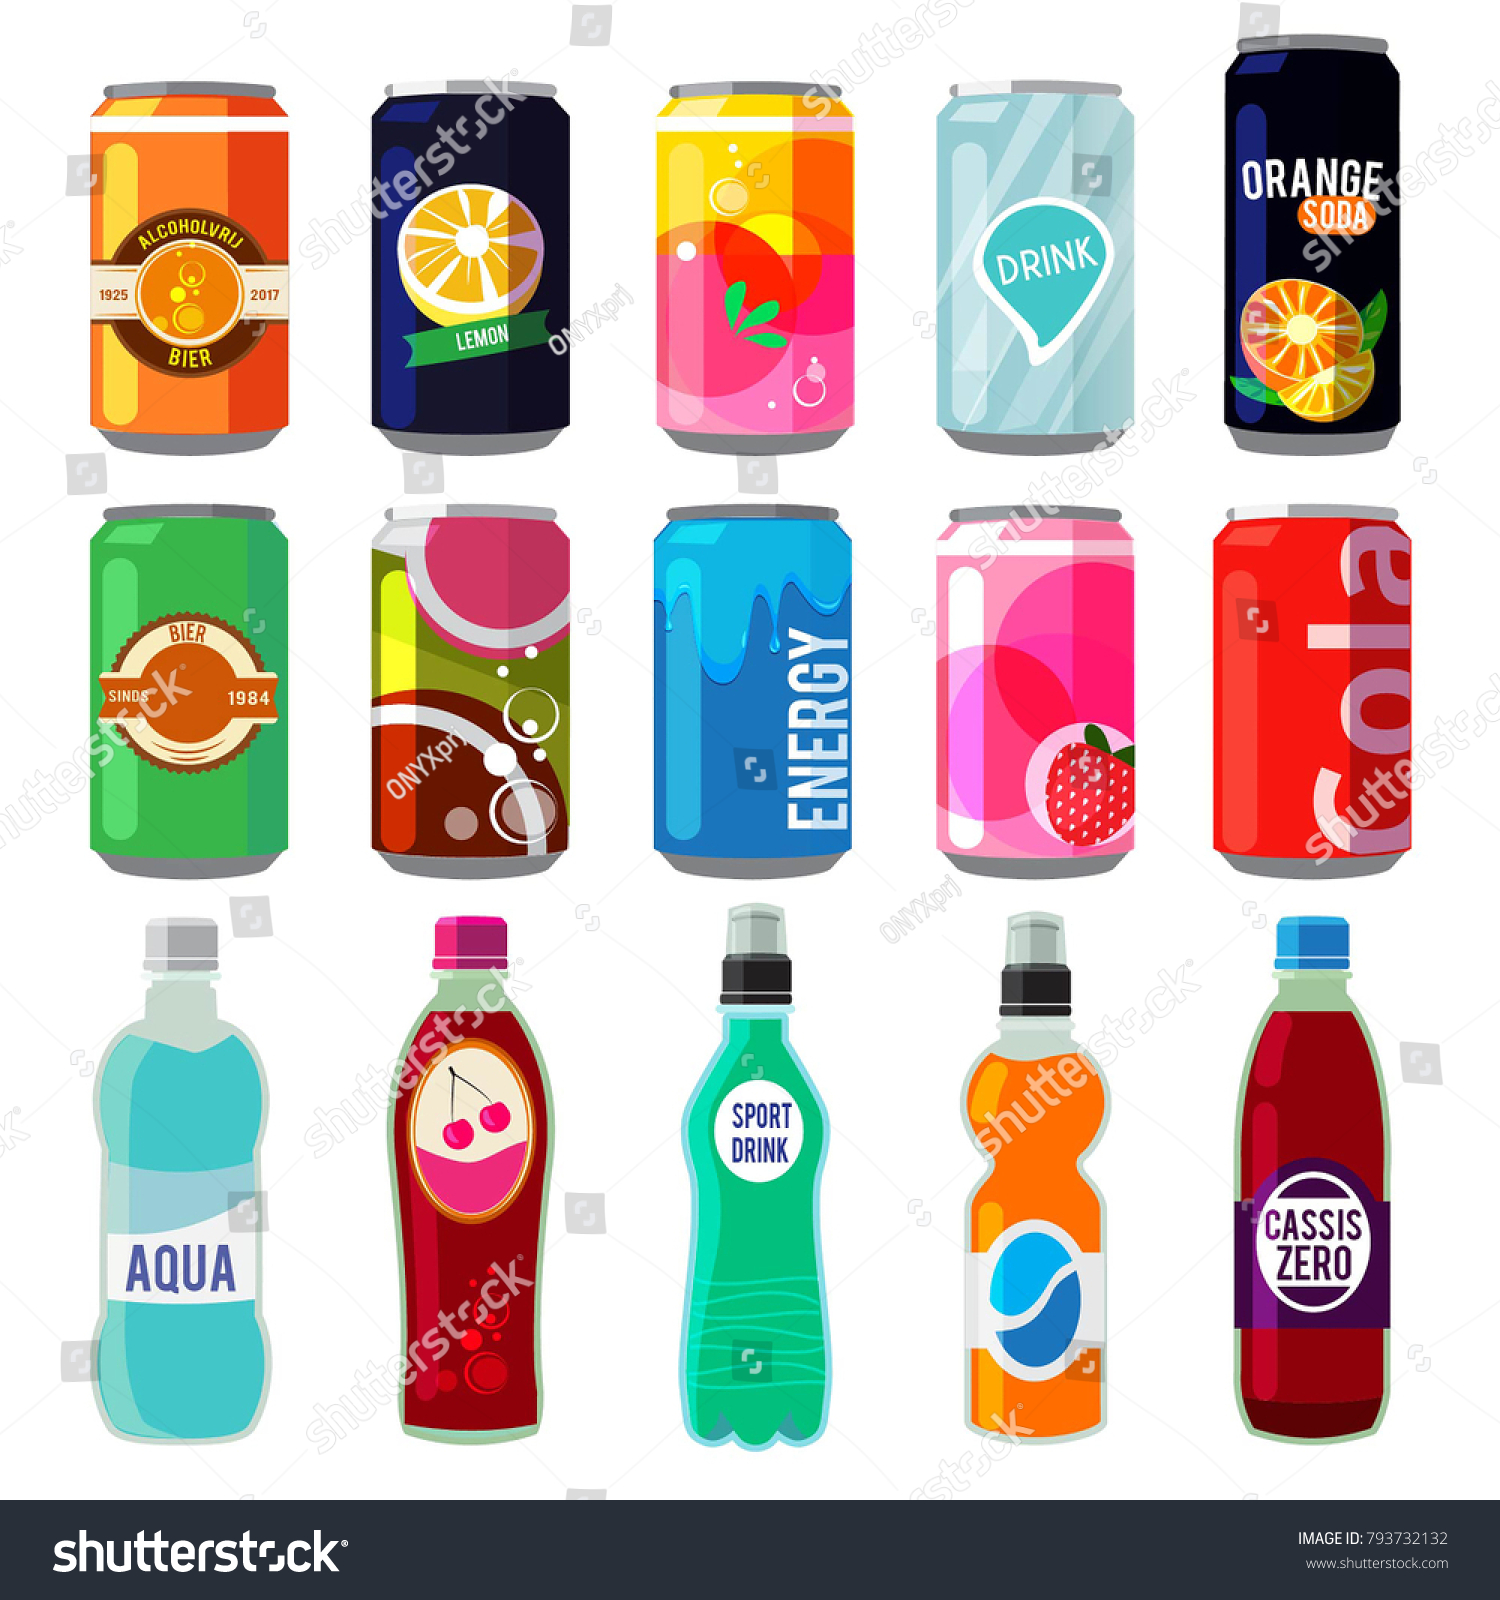 Download Illustration Different Drinks Metallic Cans Bottles Stock Vector Royalty Free 793732132 Yellowimages Mockups